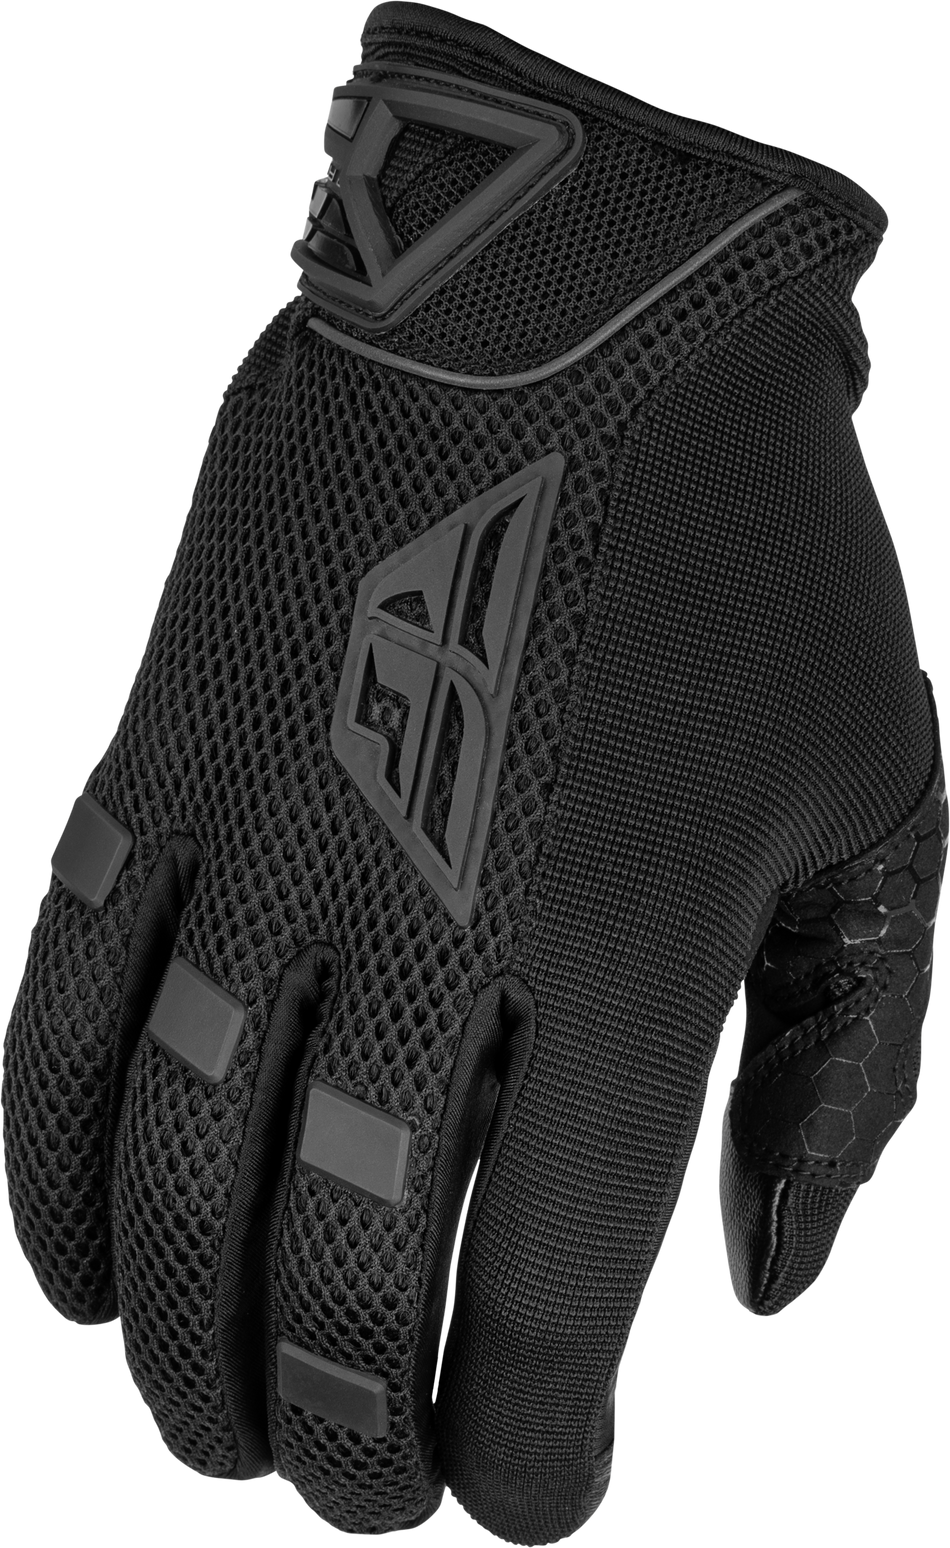 FLY RACING Coolpro Gloves Black 3x 476-40243X